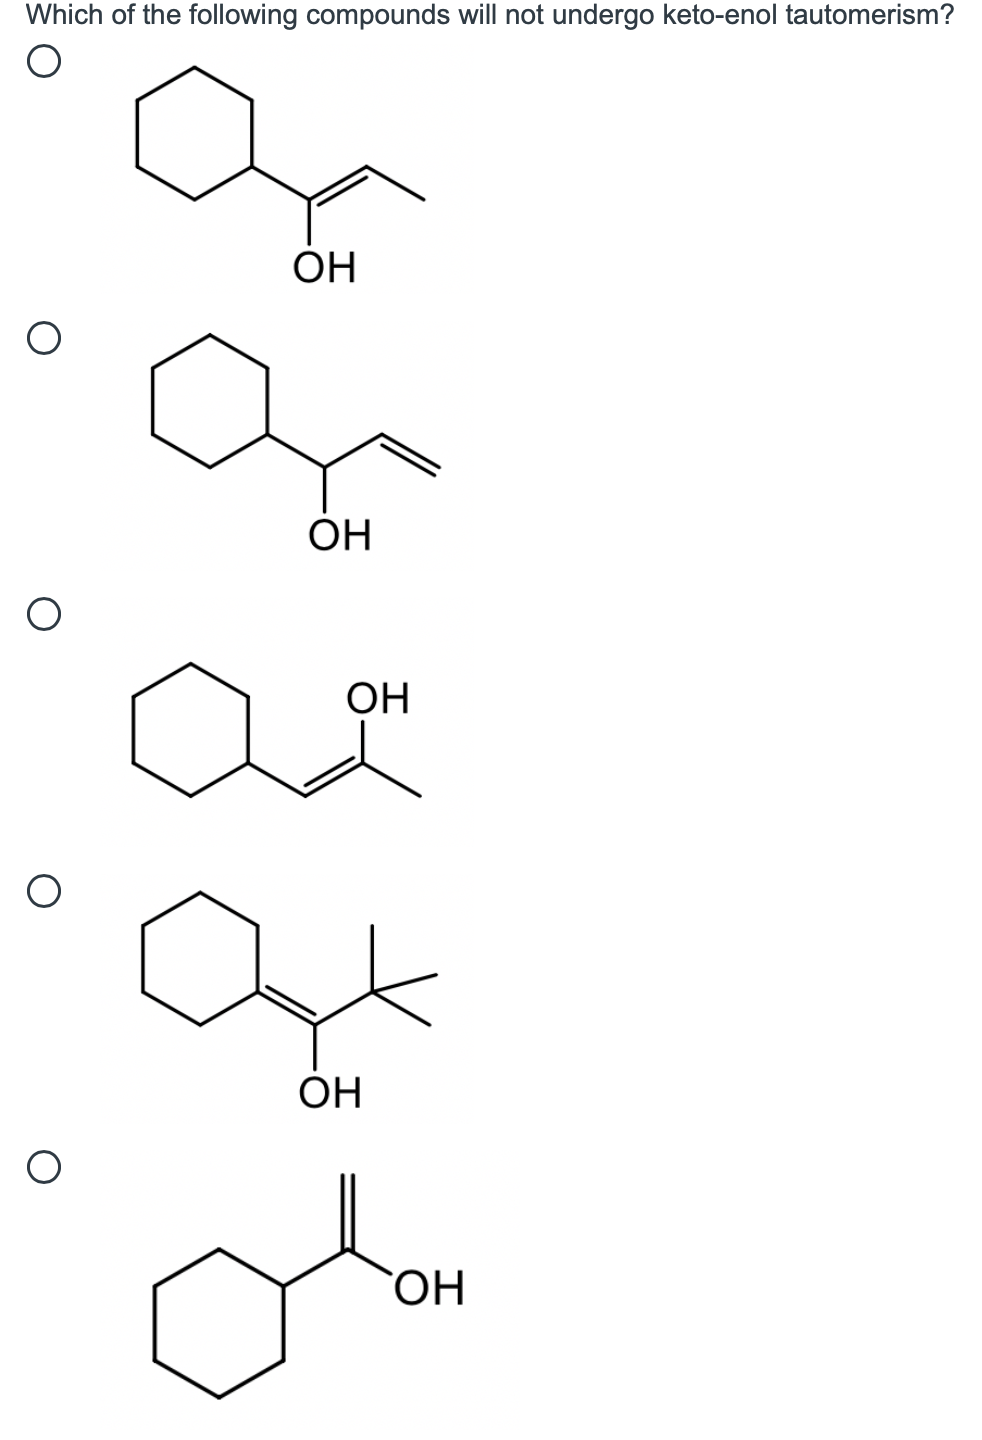 Which of the following compounds will not undergo keto-enol tautomerism?
ОН
OH
ОН
OH
ОН
